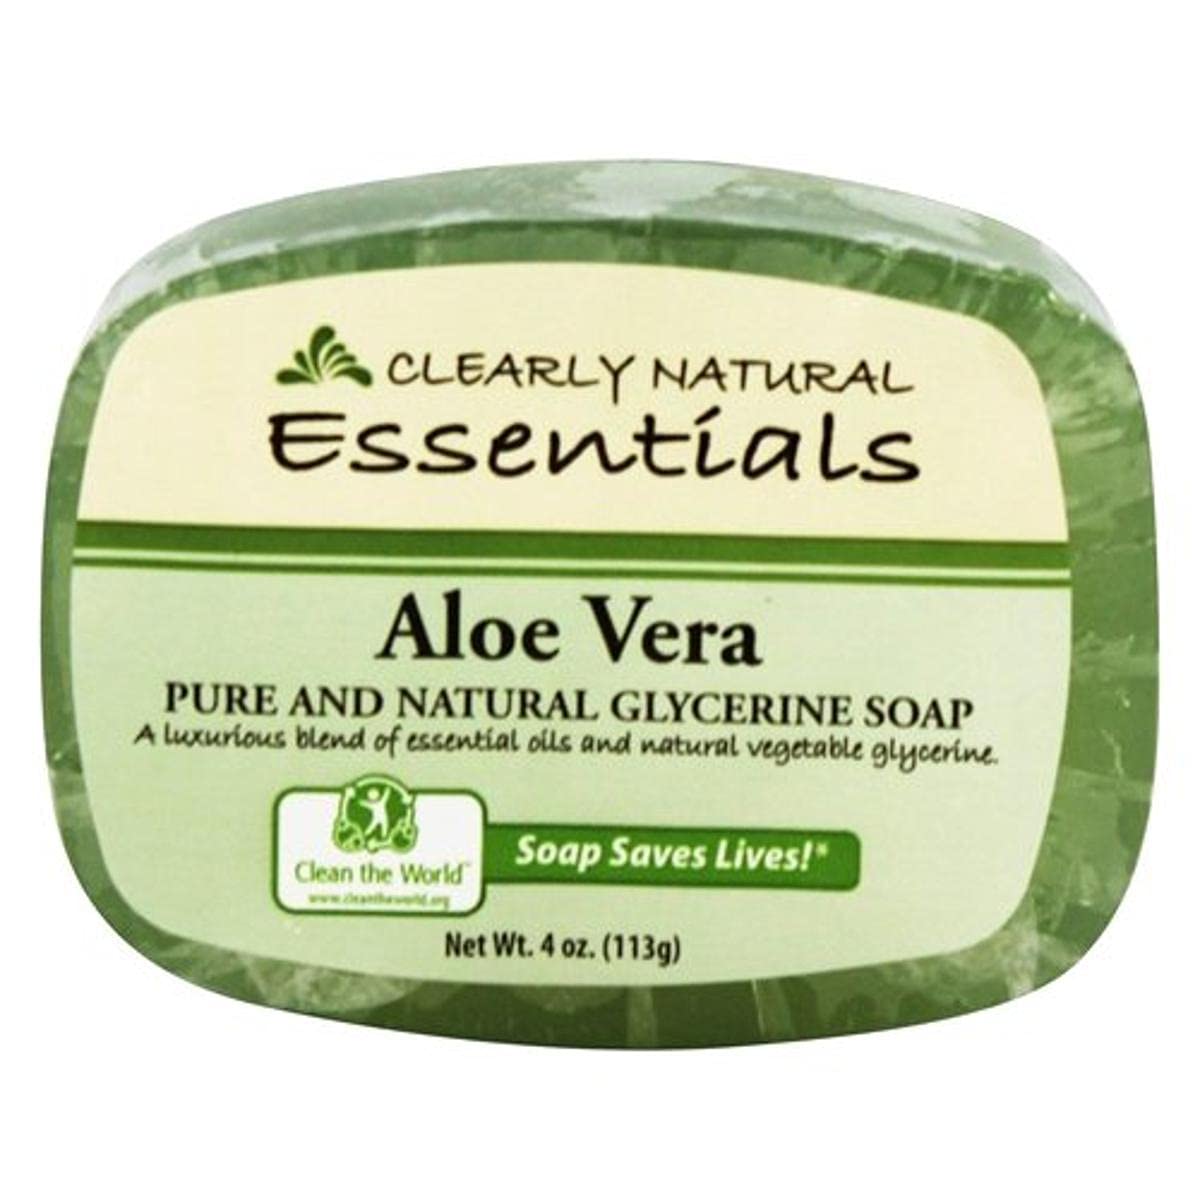 Clearly Natural Essentials Aloe Vera Pure and natural glycerine soap 4 oz